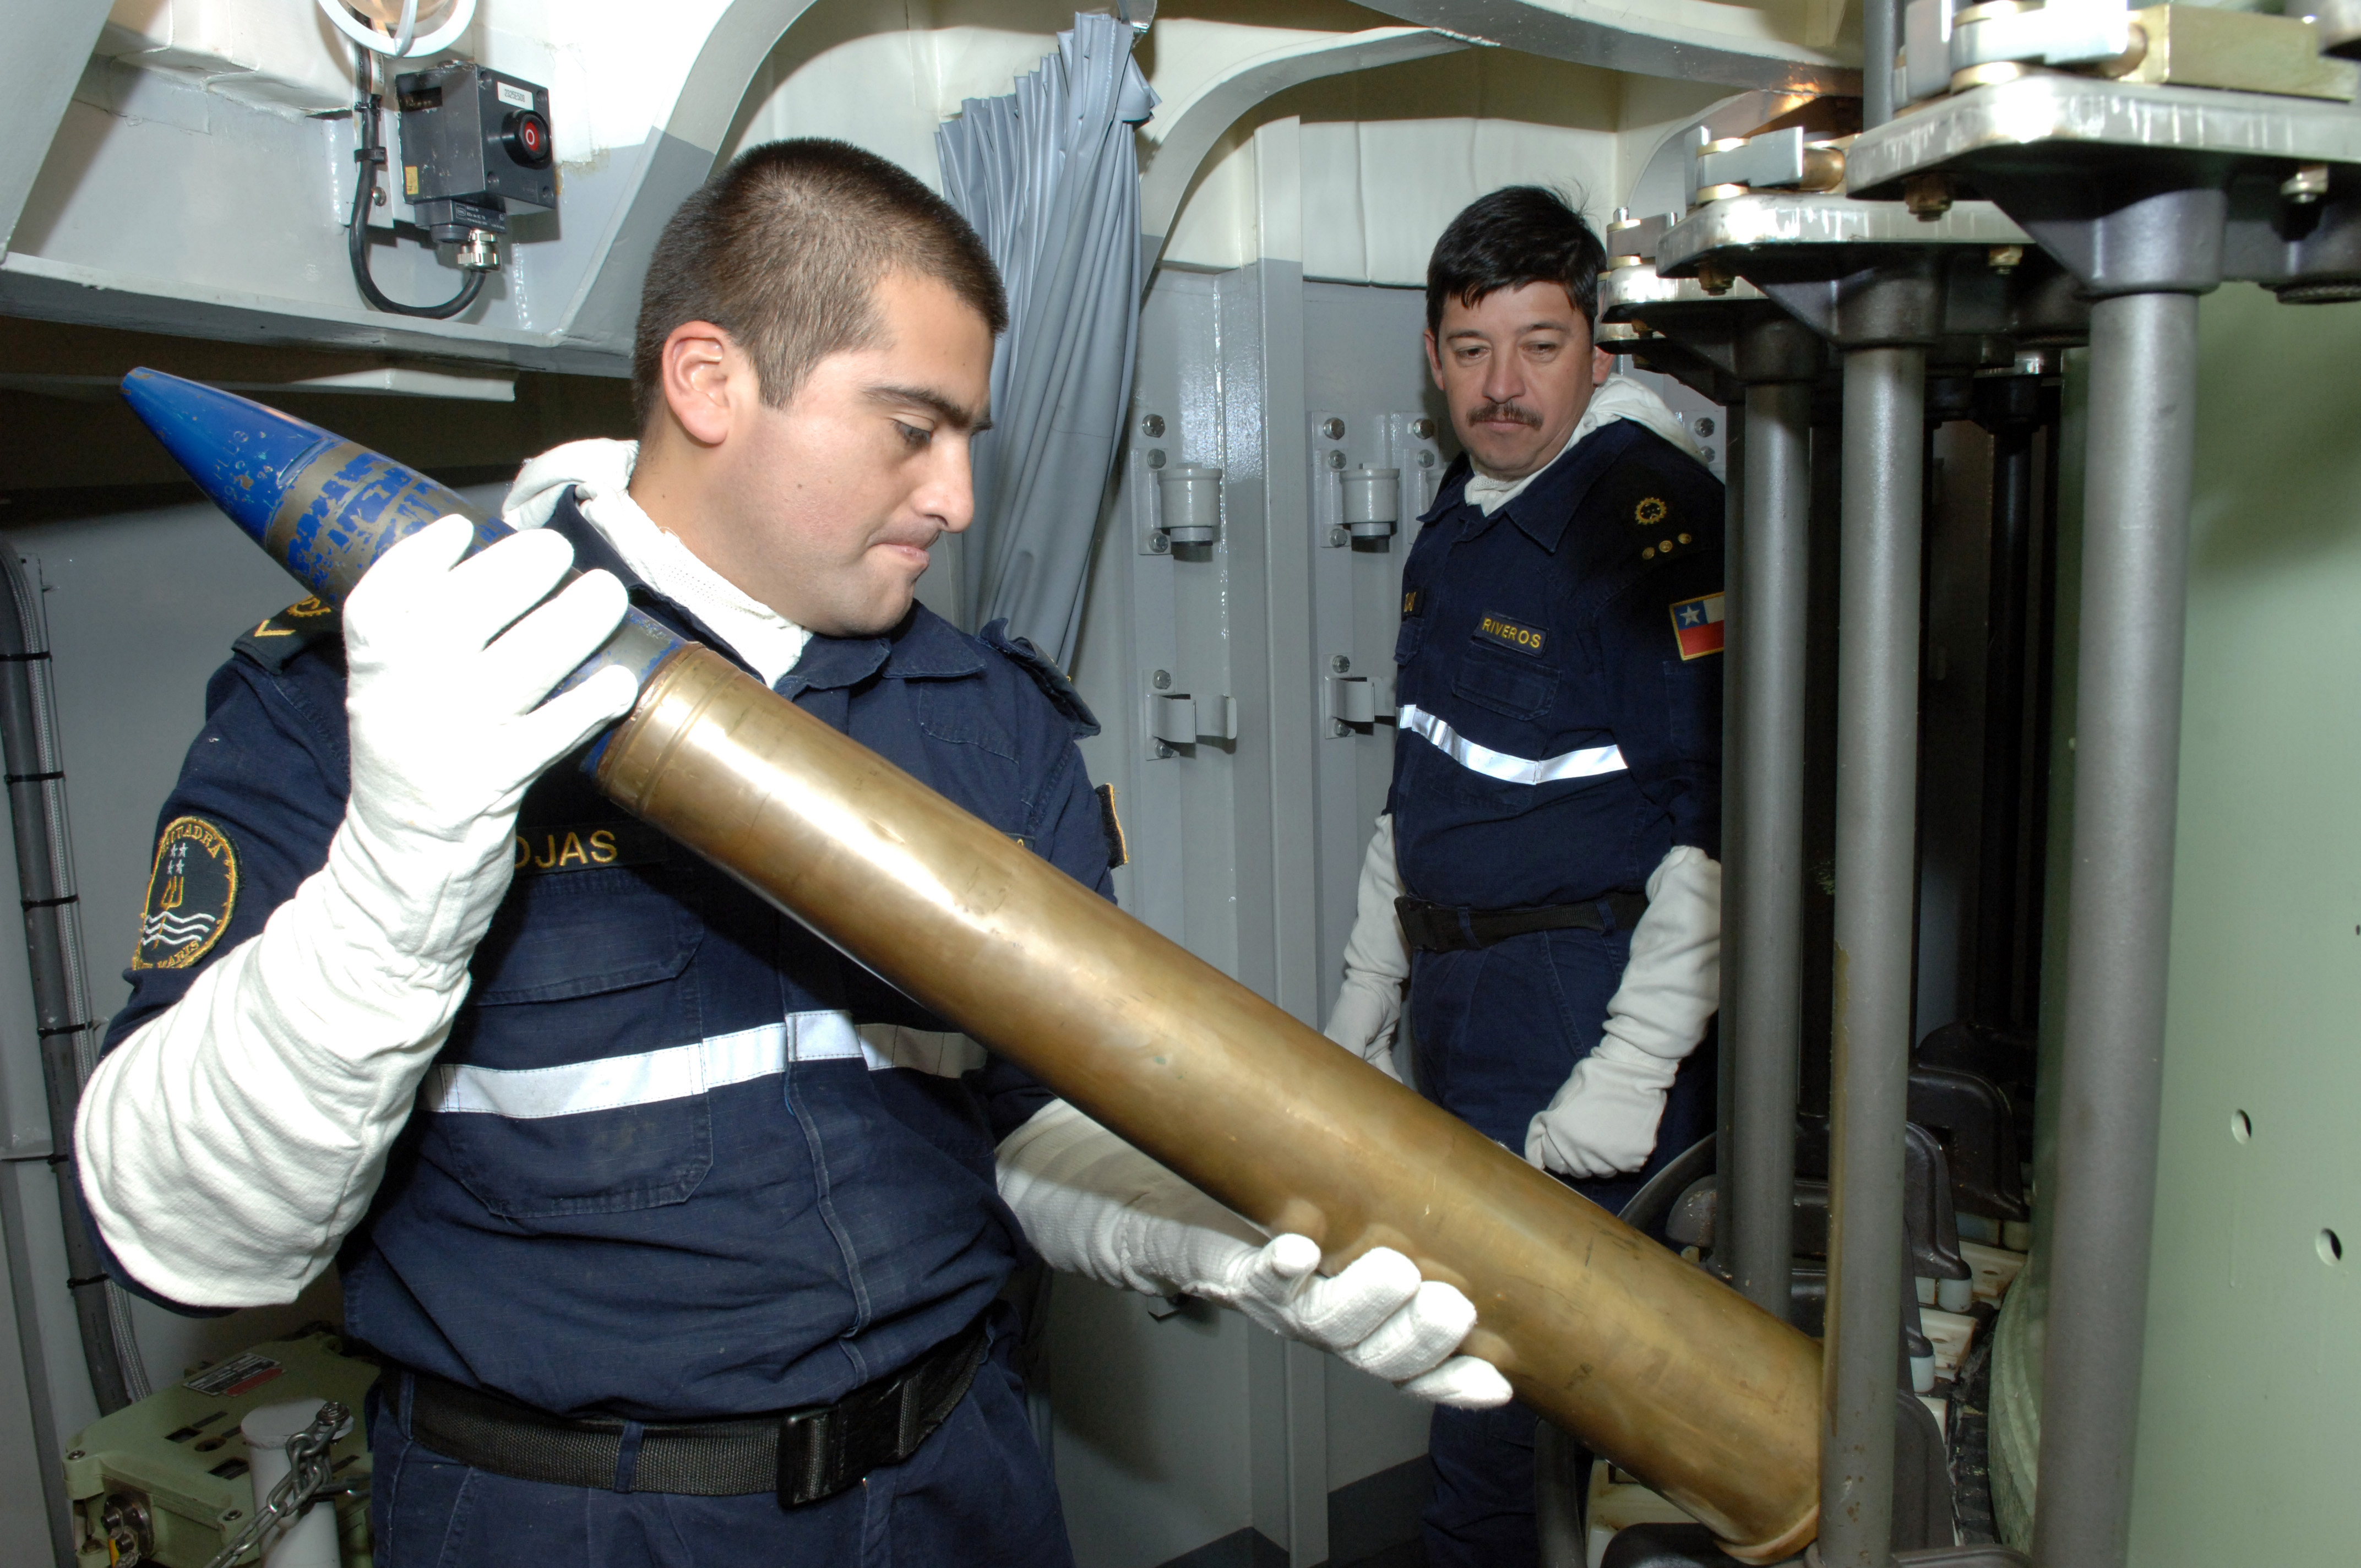 US_Navy_080720-N-3931M-078_Cpl._Boris_Rojas_loads_an_ammunition_into_the_magazine_of_a_76_mm_gun_aboard_the_Chilean_navy_frigate_CS_Riveros_(FF18)_during_a_Rim_of_the_Pacific_(RIMPAC)_2008_exercise_off_the_coast_of_Hawaii.jpg